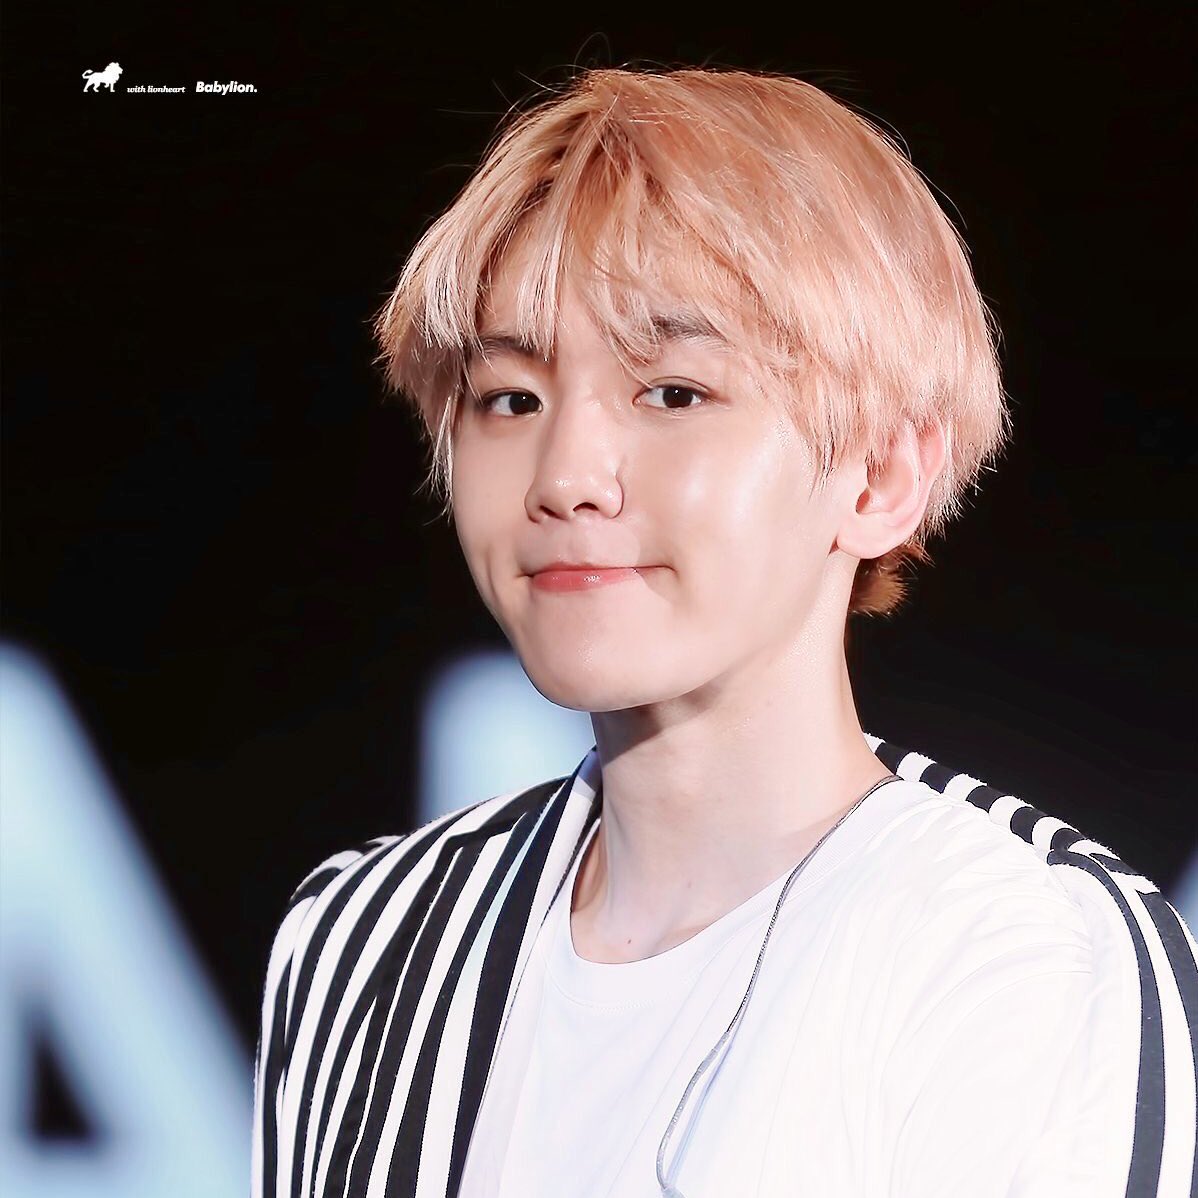 I guess I'll stop here bc im really tired and remembering all this toxicity i feel sick baekhyun is the sweetest person ever he doesn't deserve this ... hate support his solo on july 10 and shower him with alot of love bc he deserves it